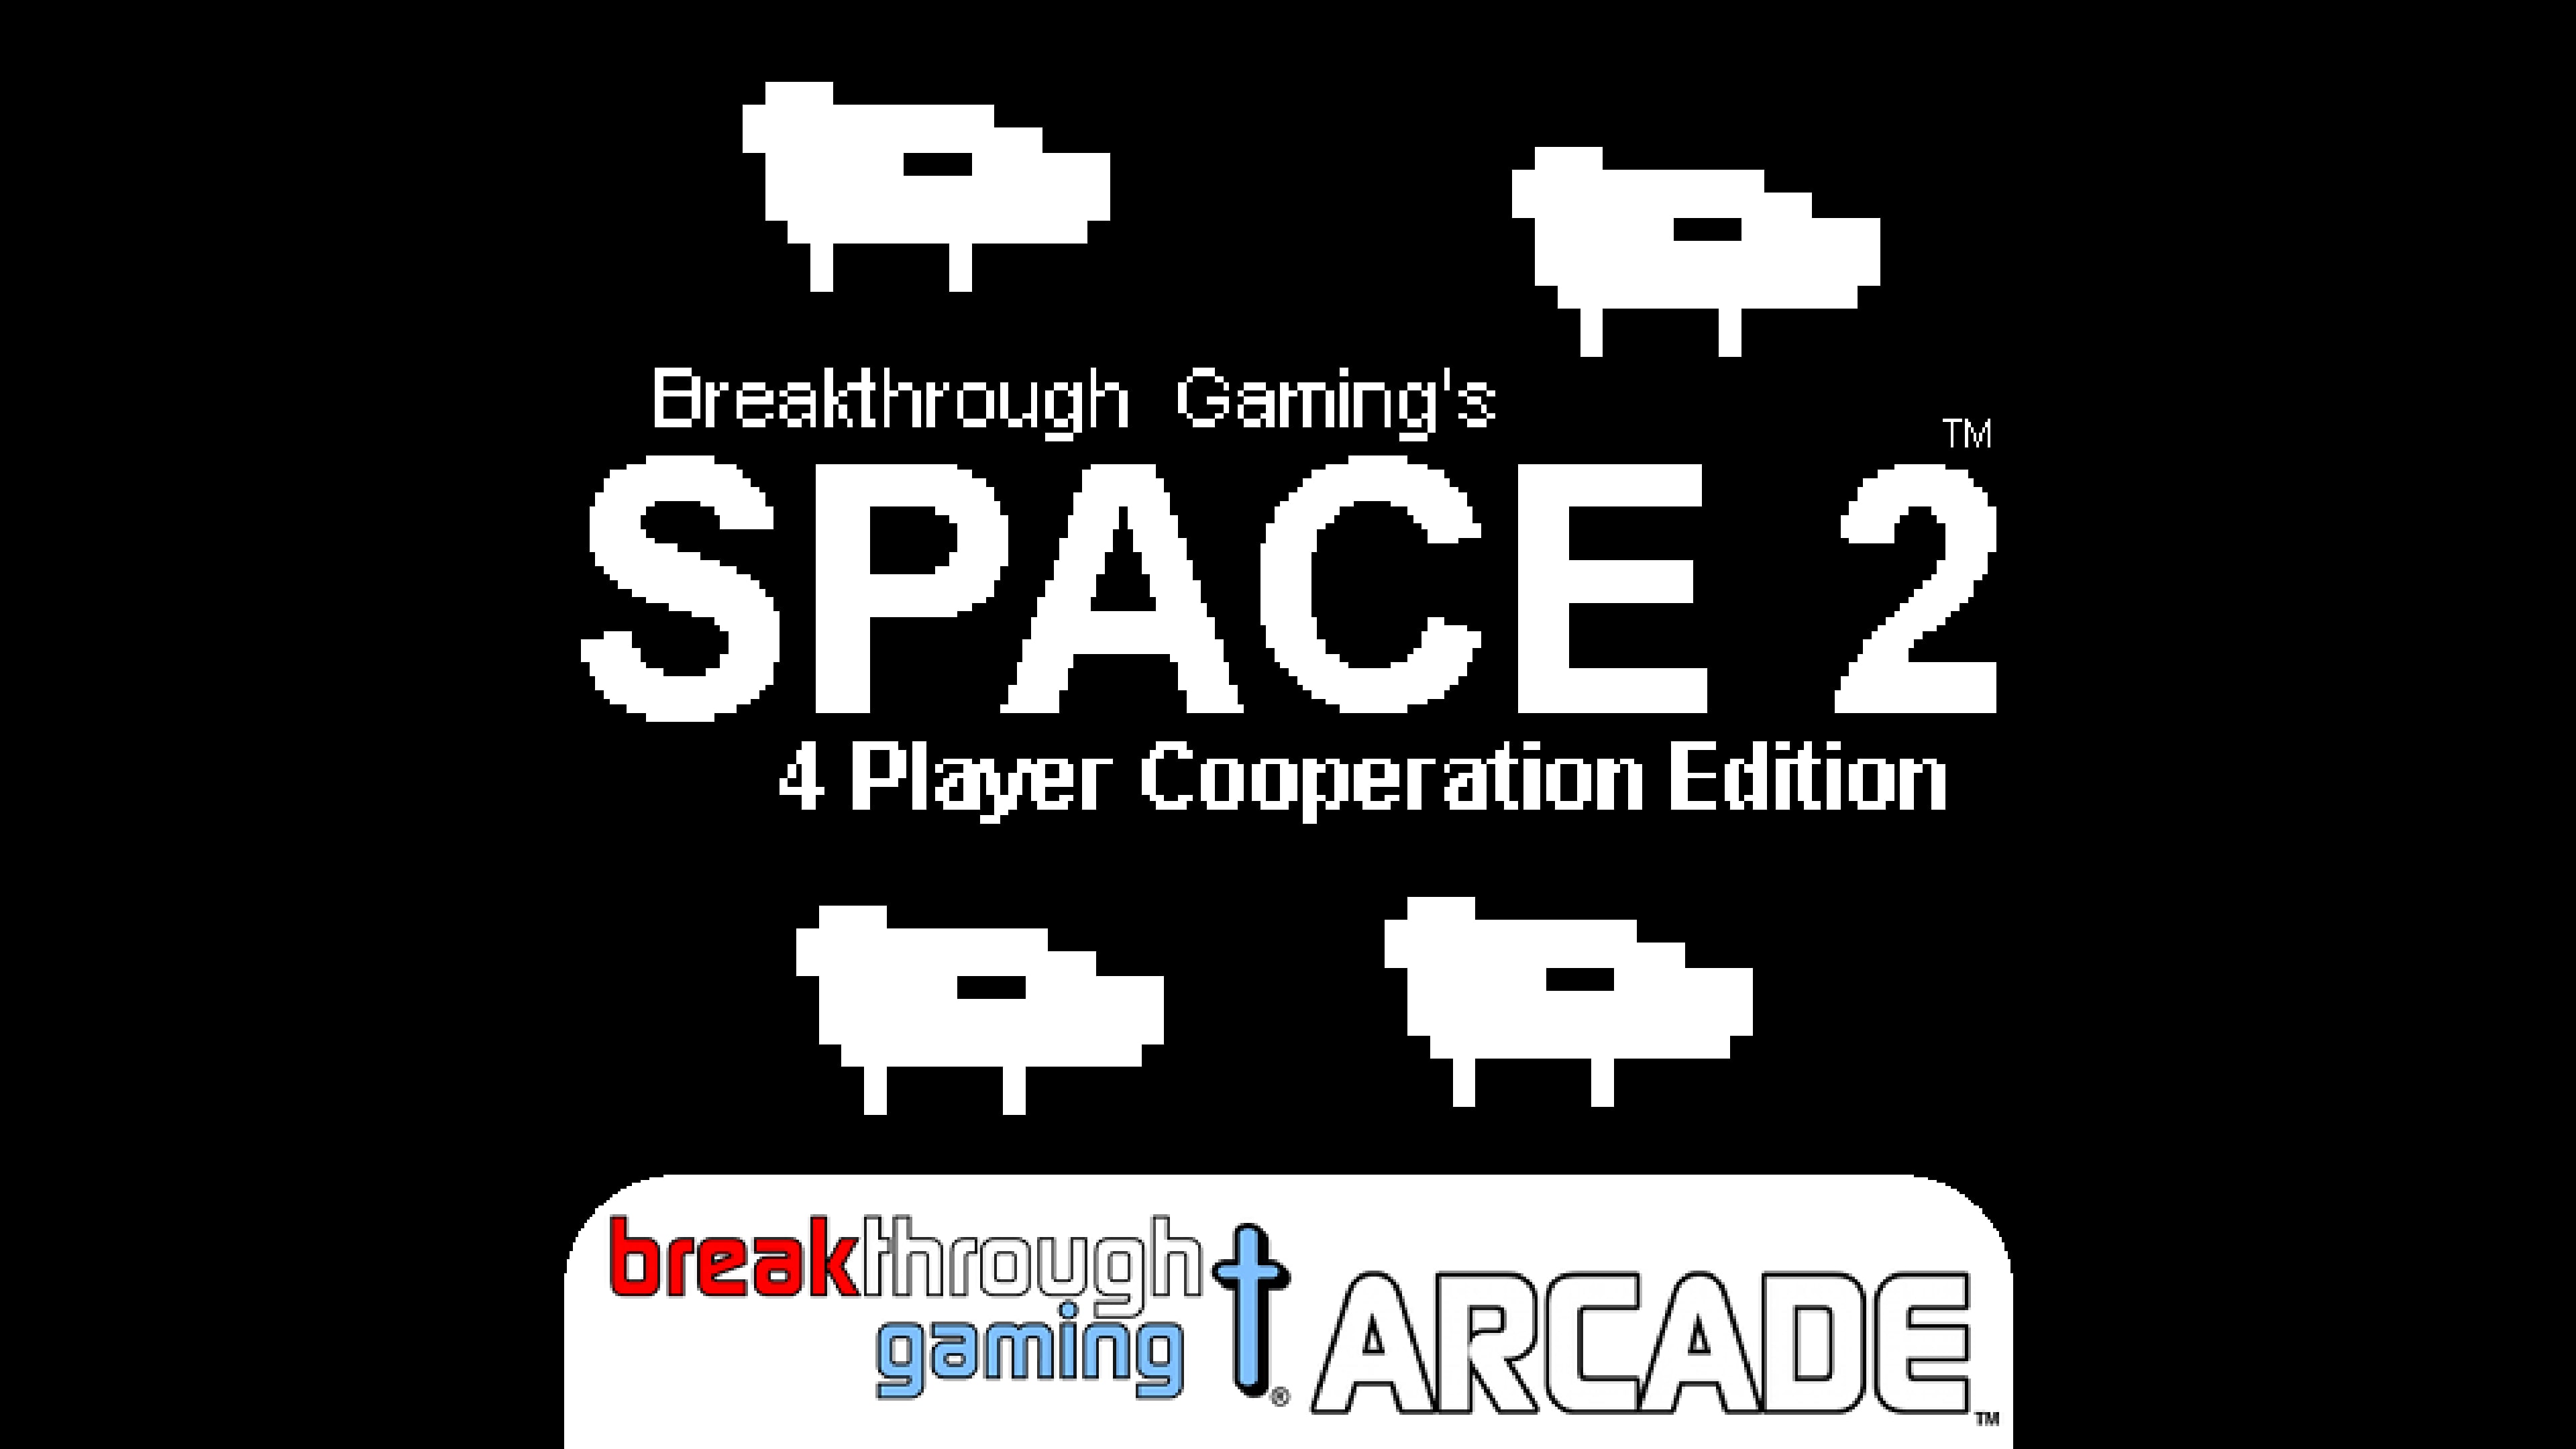 Space 2 (4 Player Cooperation Edition) - Breakthrough Gaming Arcade